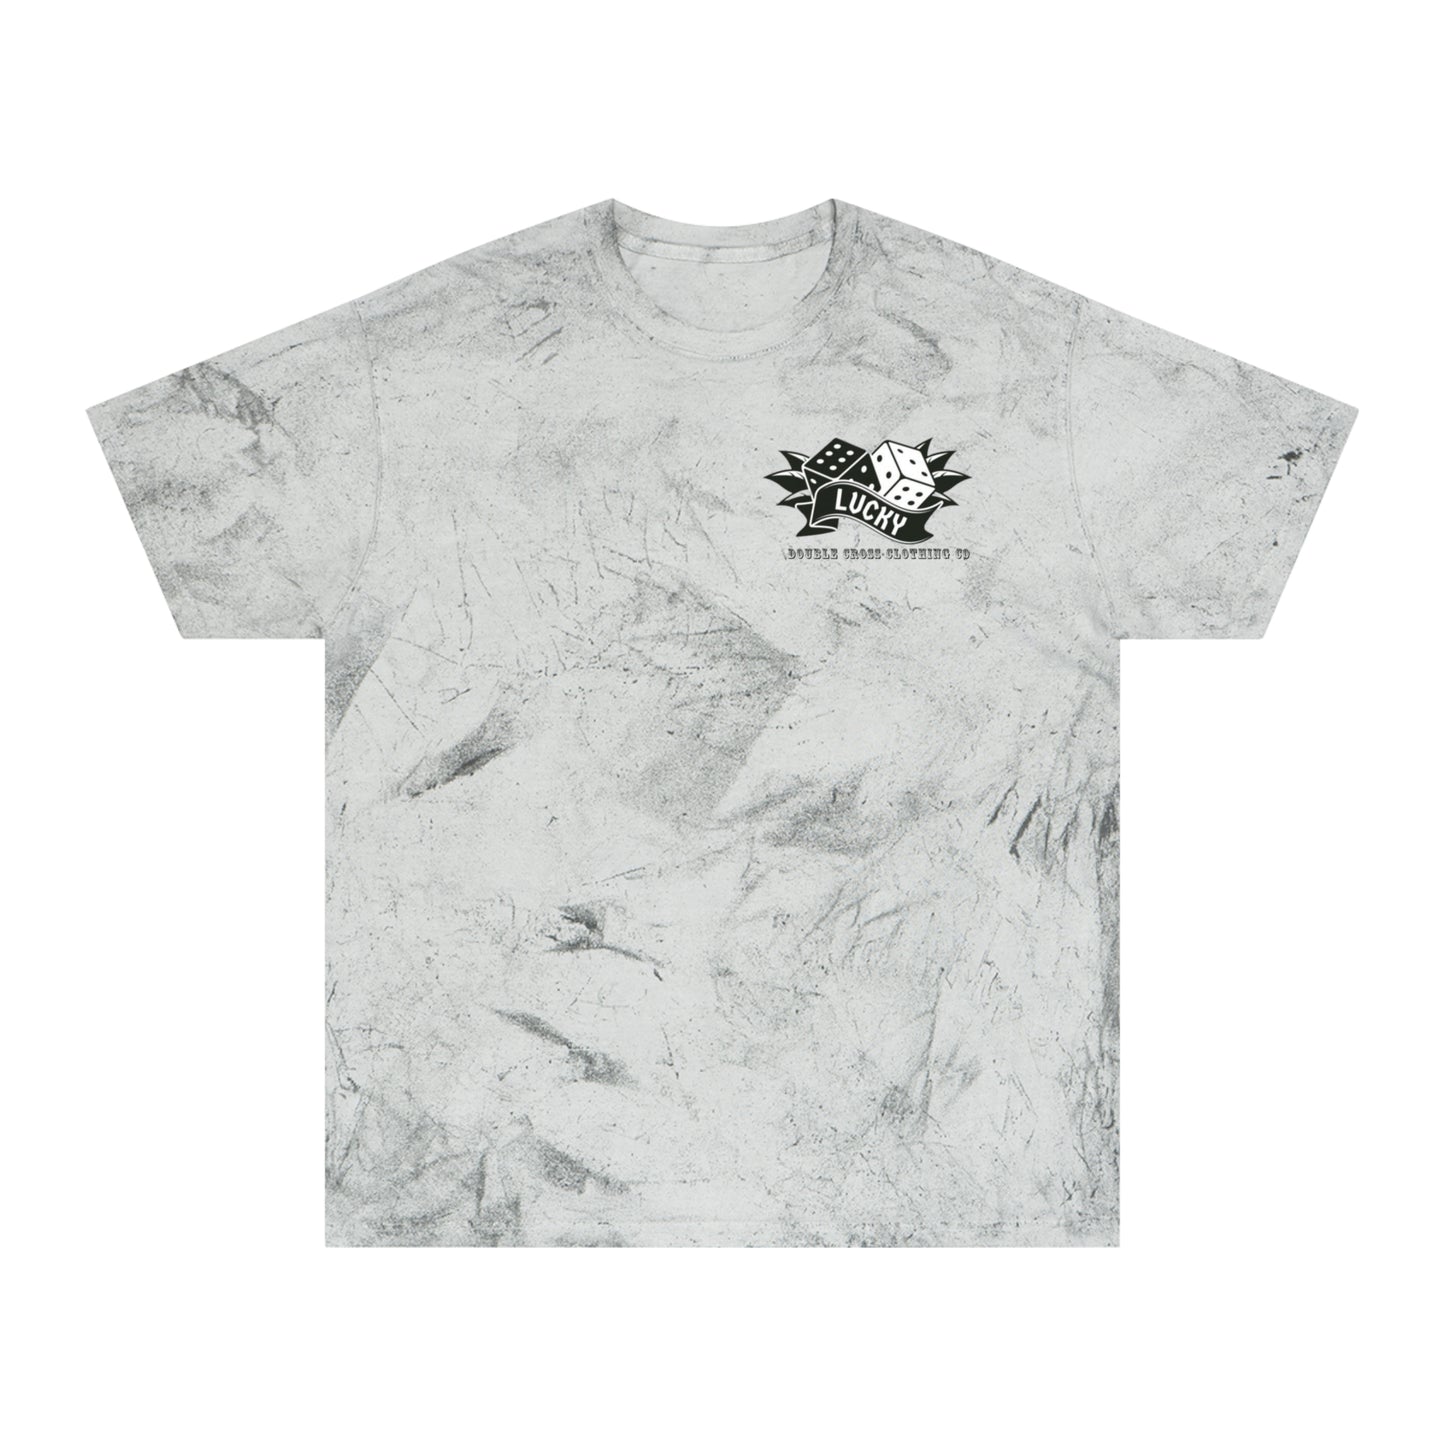 Jack of All Trades Tie-Dye T-Shirt